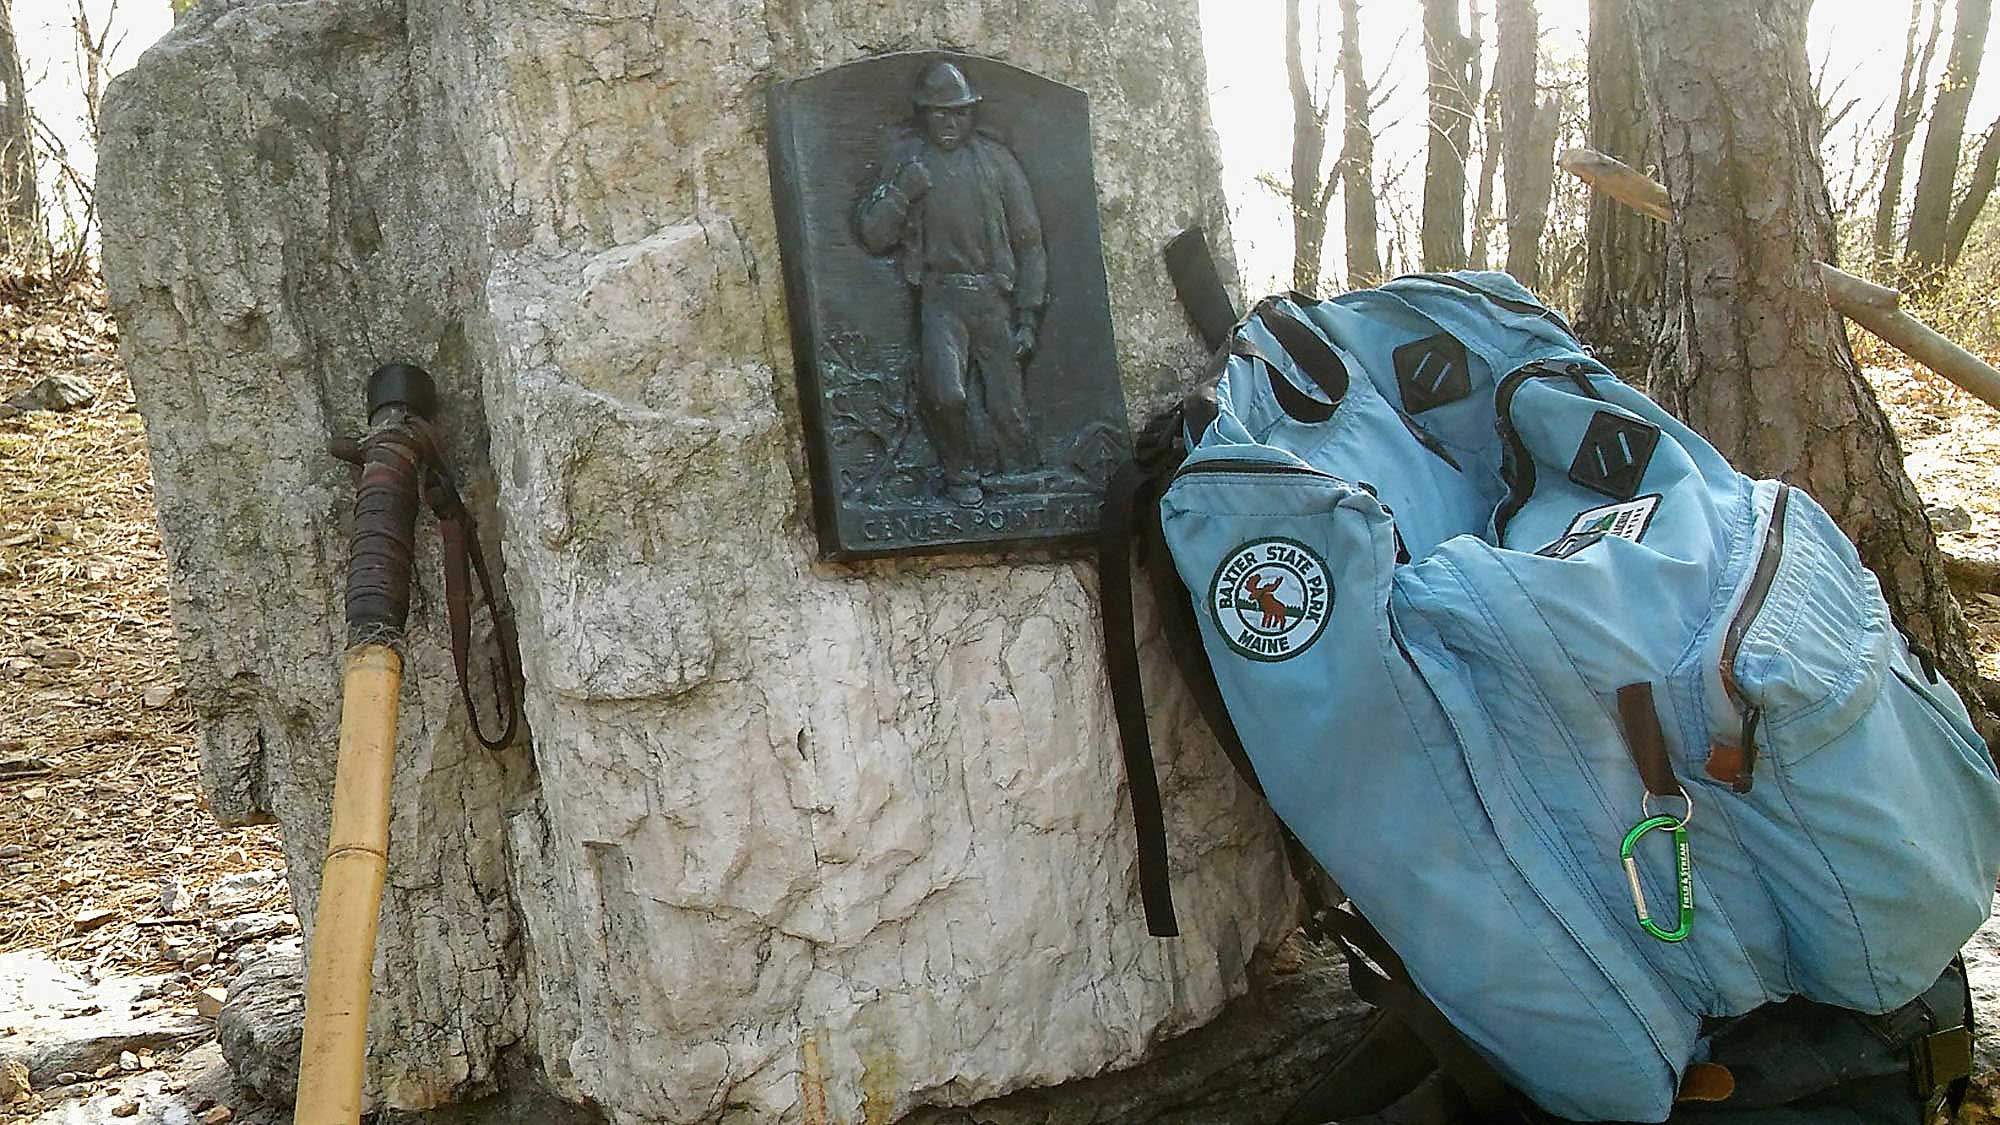 Center Point Knob south of boiling Springs, Cumberland County, the original mid-point of the AT, is marked with a commemorative plaque. Because of trail relocations, the mid-point has moved further south, near Pine Grove Furnace State Park. (Don Hopey/Pittsburgh Post-Gazette)